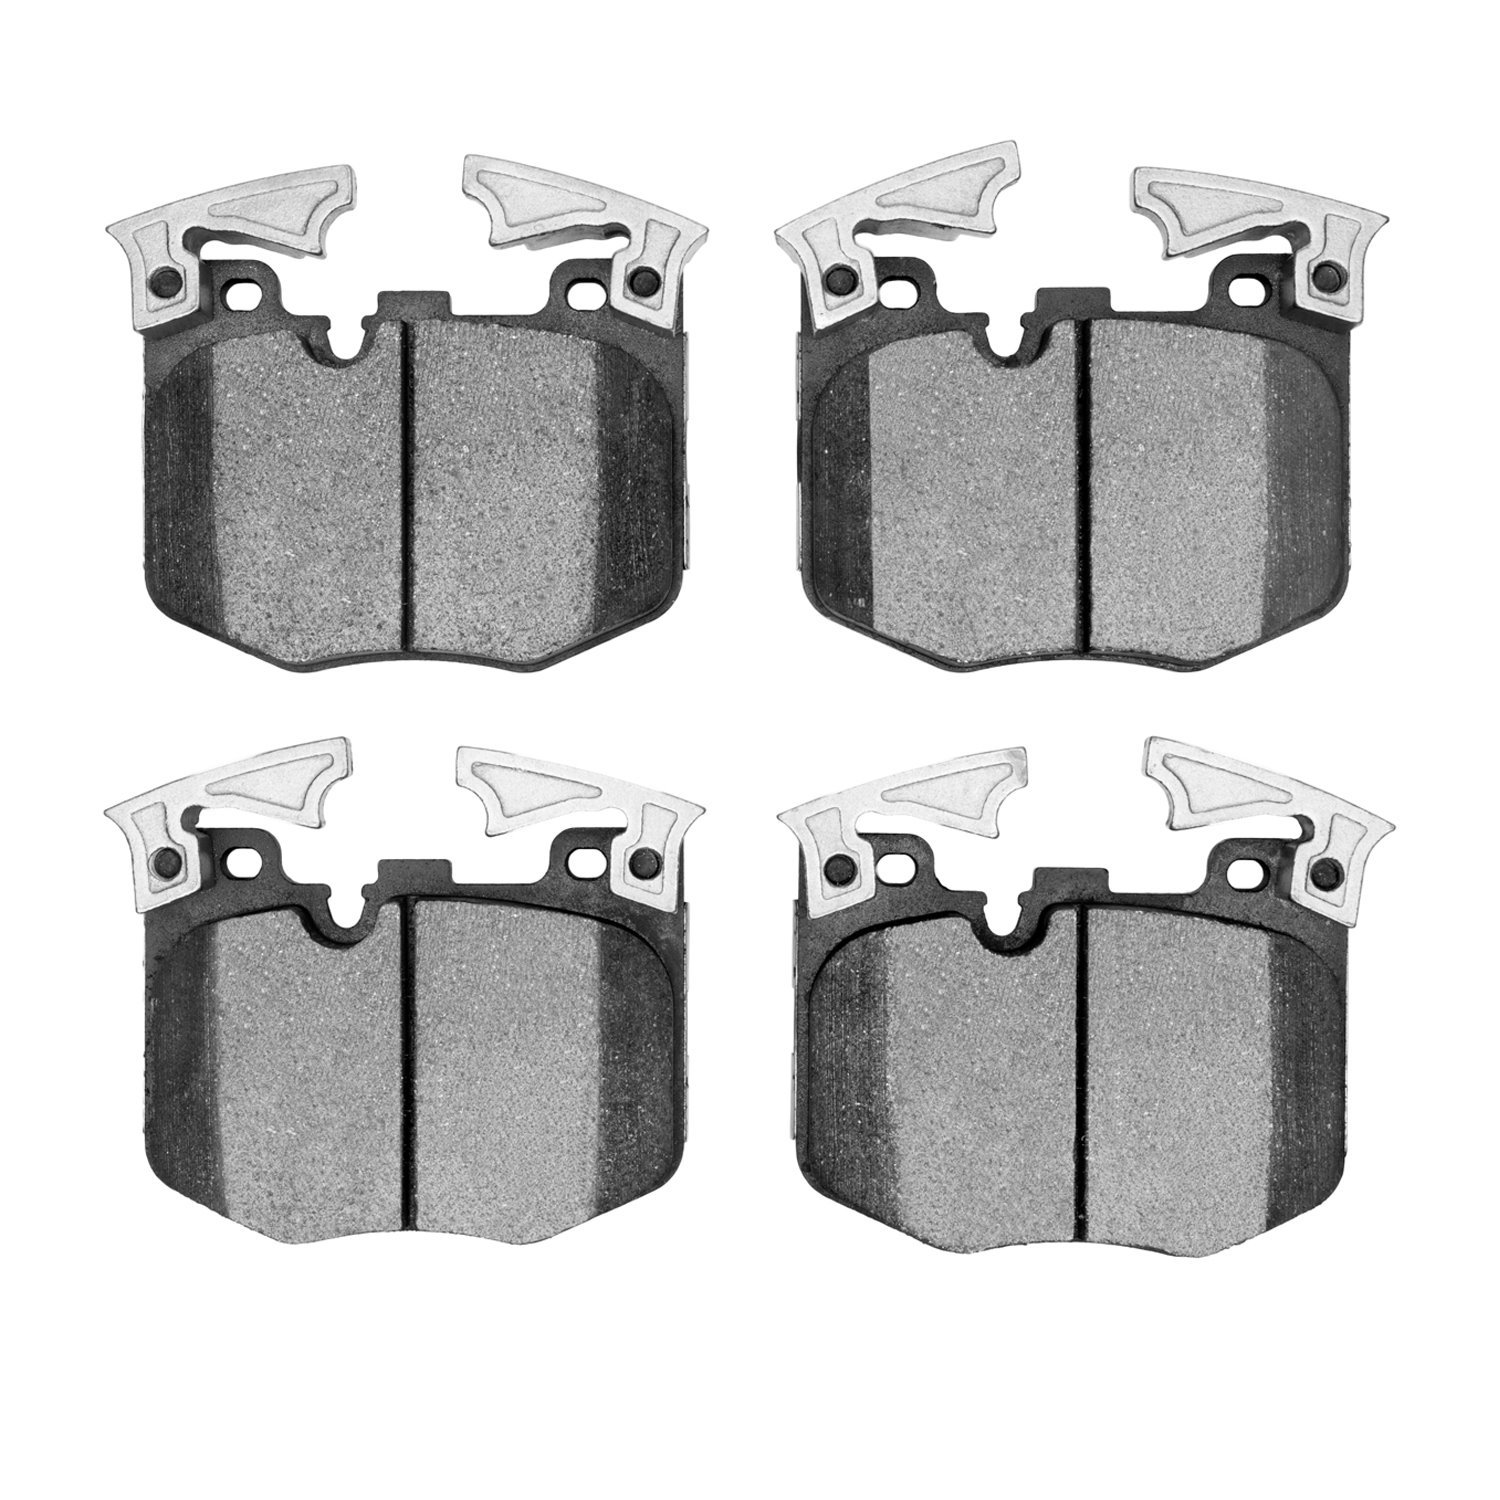 1552-1867-00 5000 Advanced Low-Metallic Brake Pads, Fits Select Multiple Makes/Models, Position: Front